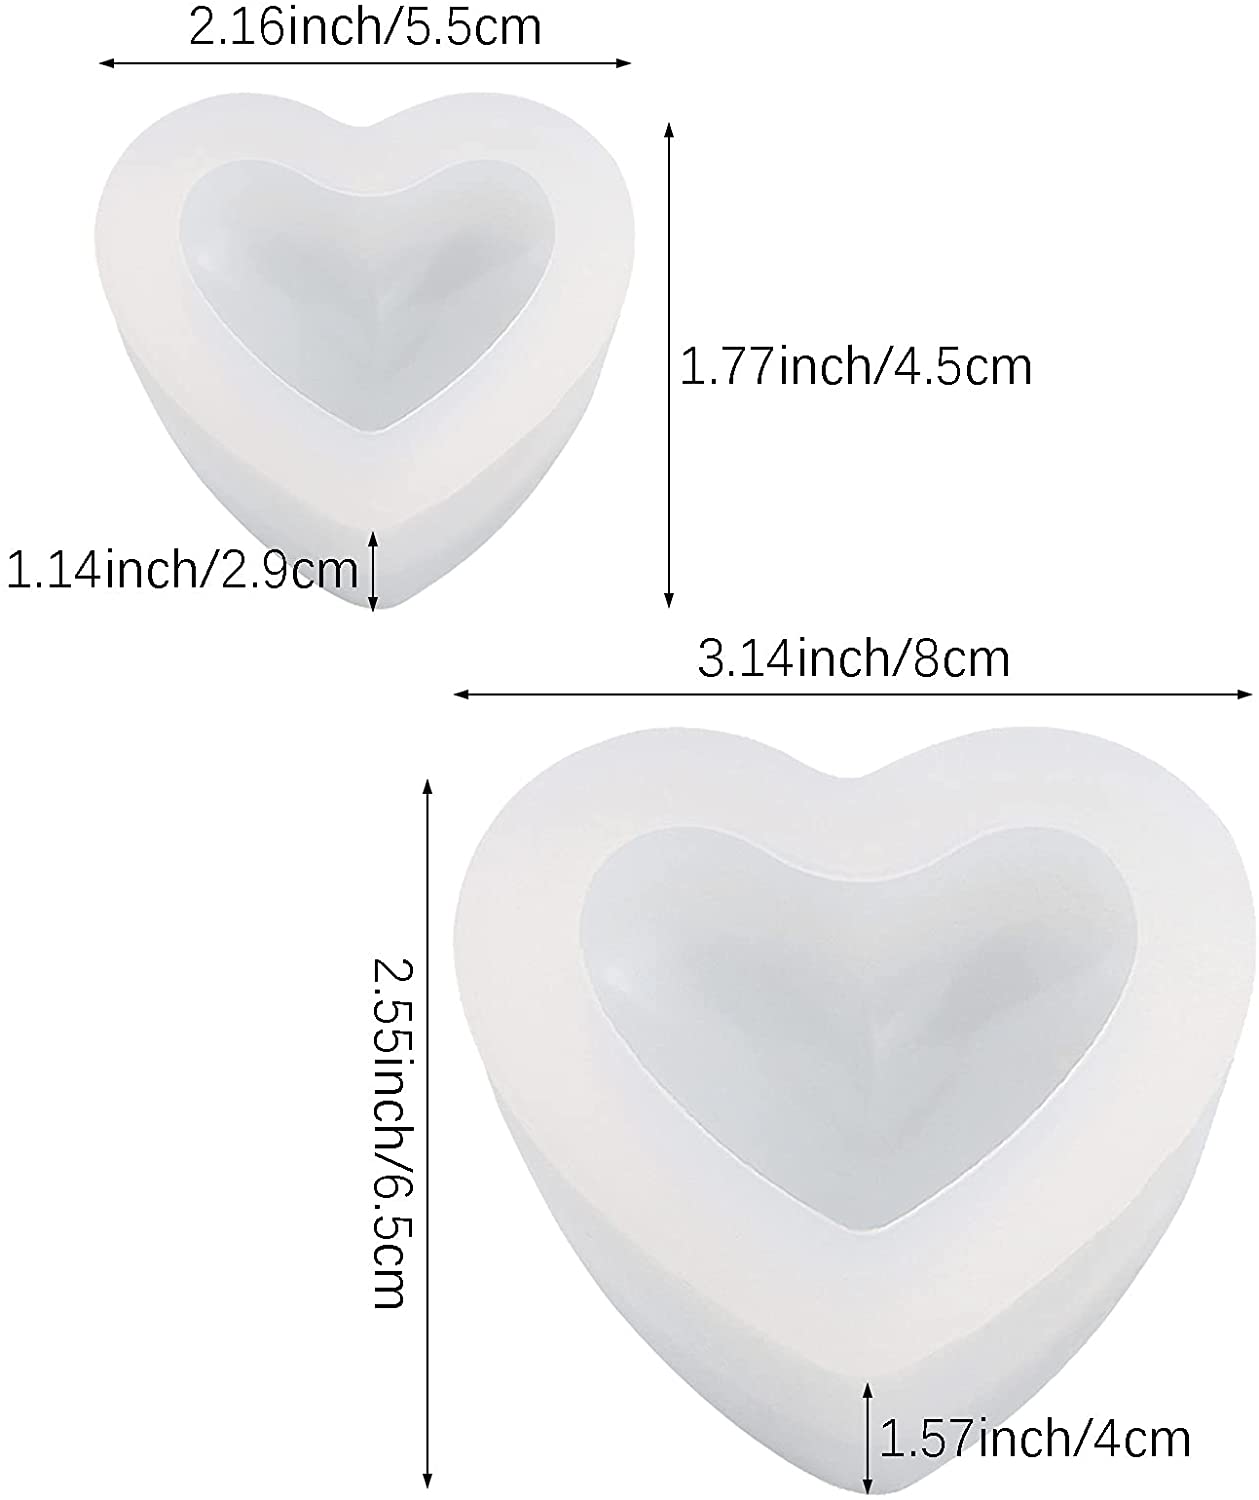 2-Pcs-Love-Heart-Shape-Silicone-Mold-Silicone-Moulds-3D-Heart-Soap-Mold-for-DIY-Handmade-Soap-Crafts-Silicone-Heart-Pend-B094XZ22RW-2.jpg